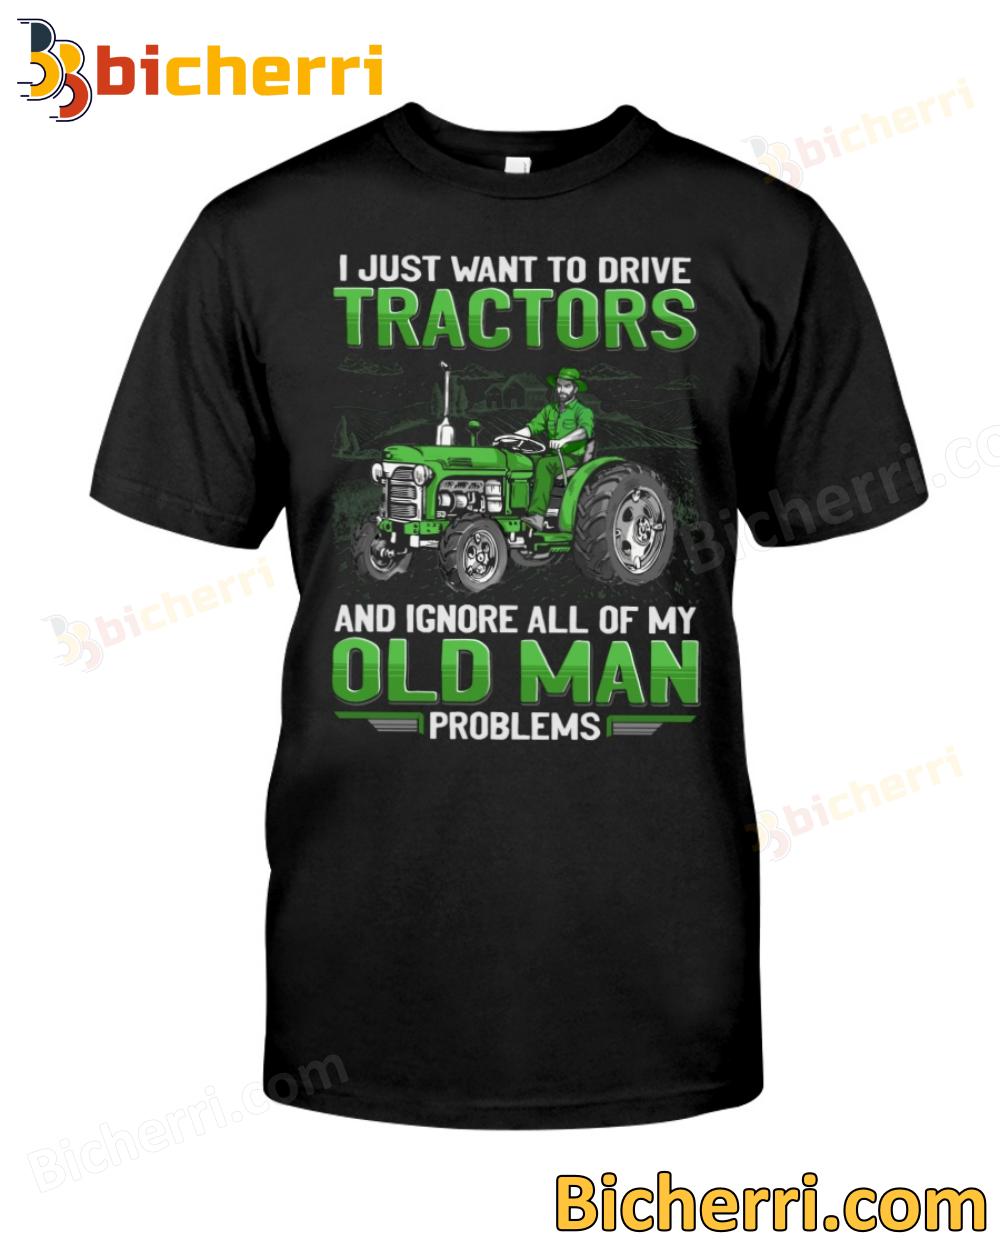 I Just Want To Drive Tractors And Ignore All Of My Old Man Problems T-shirt, Sweatshirt